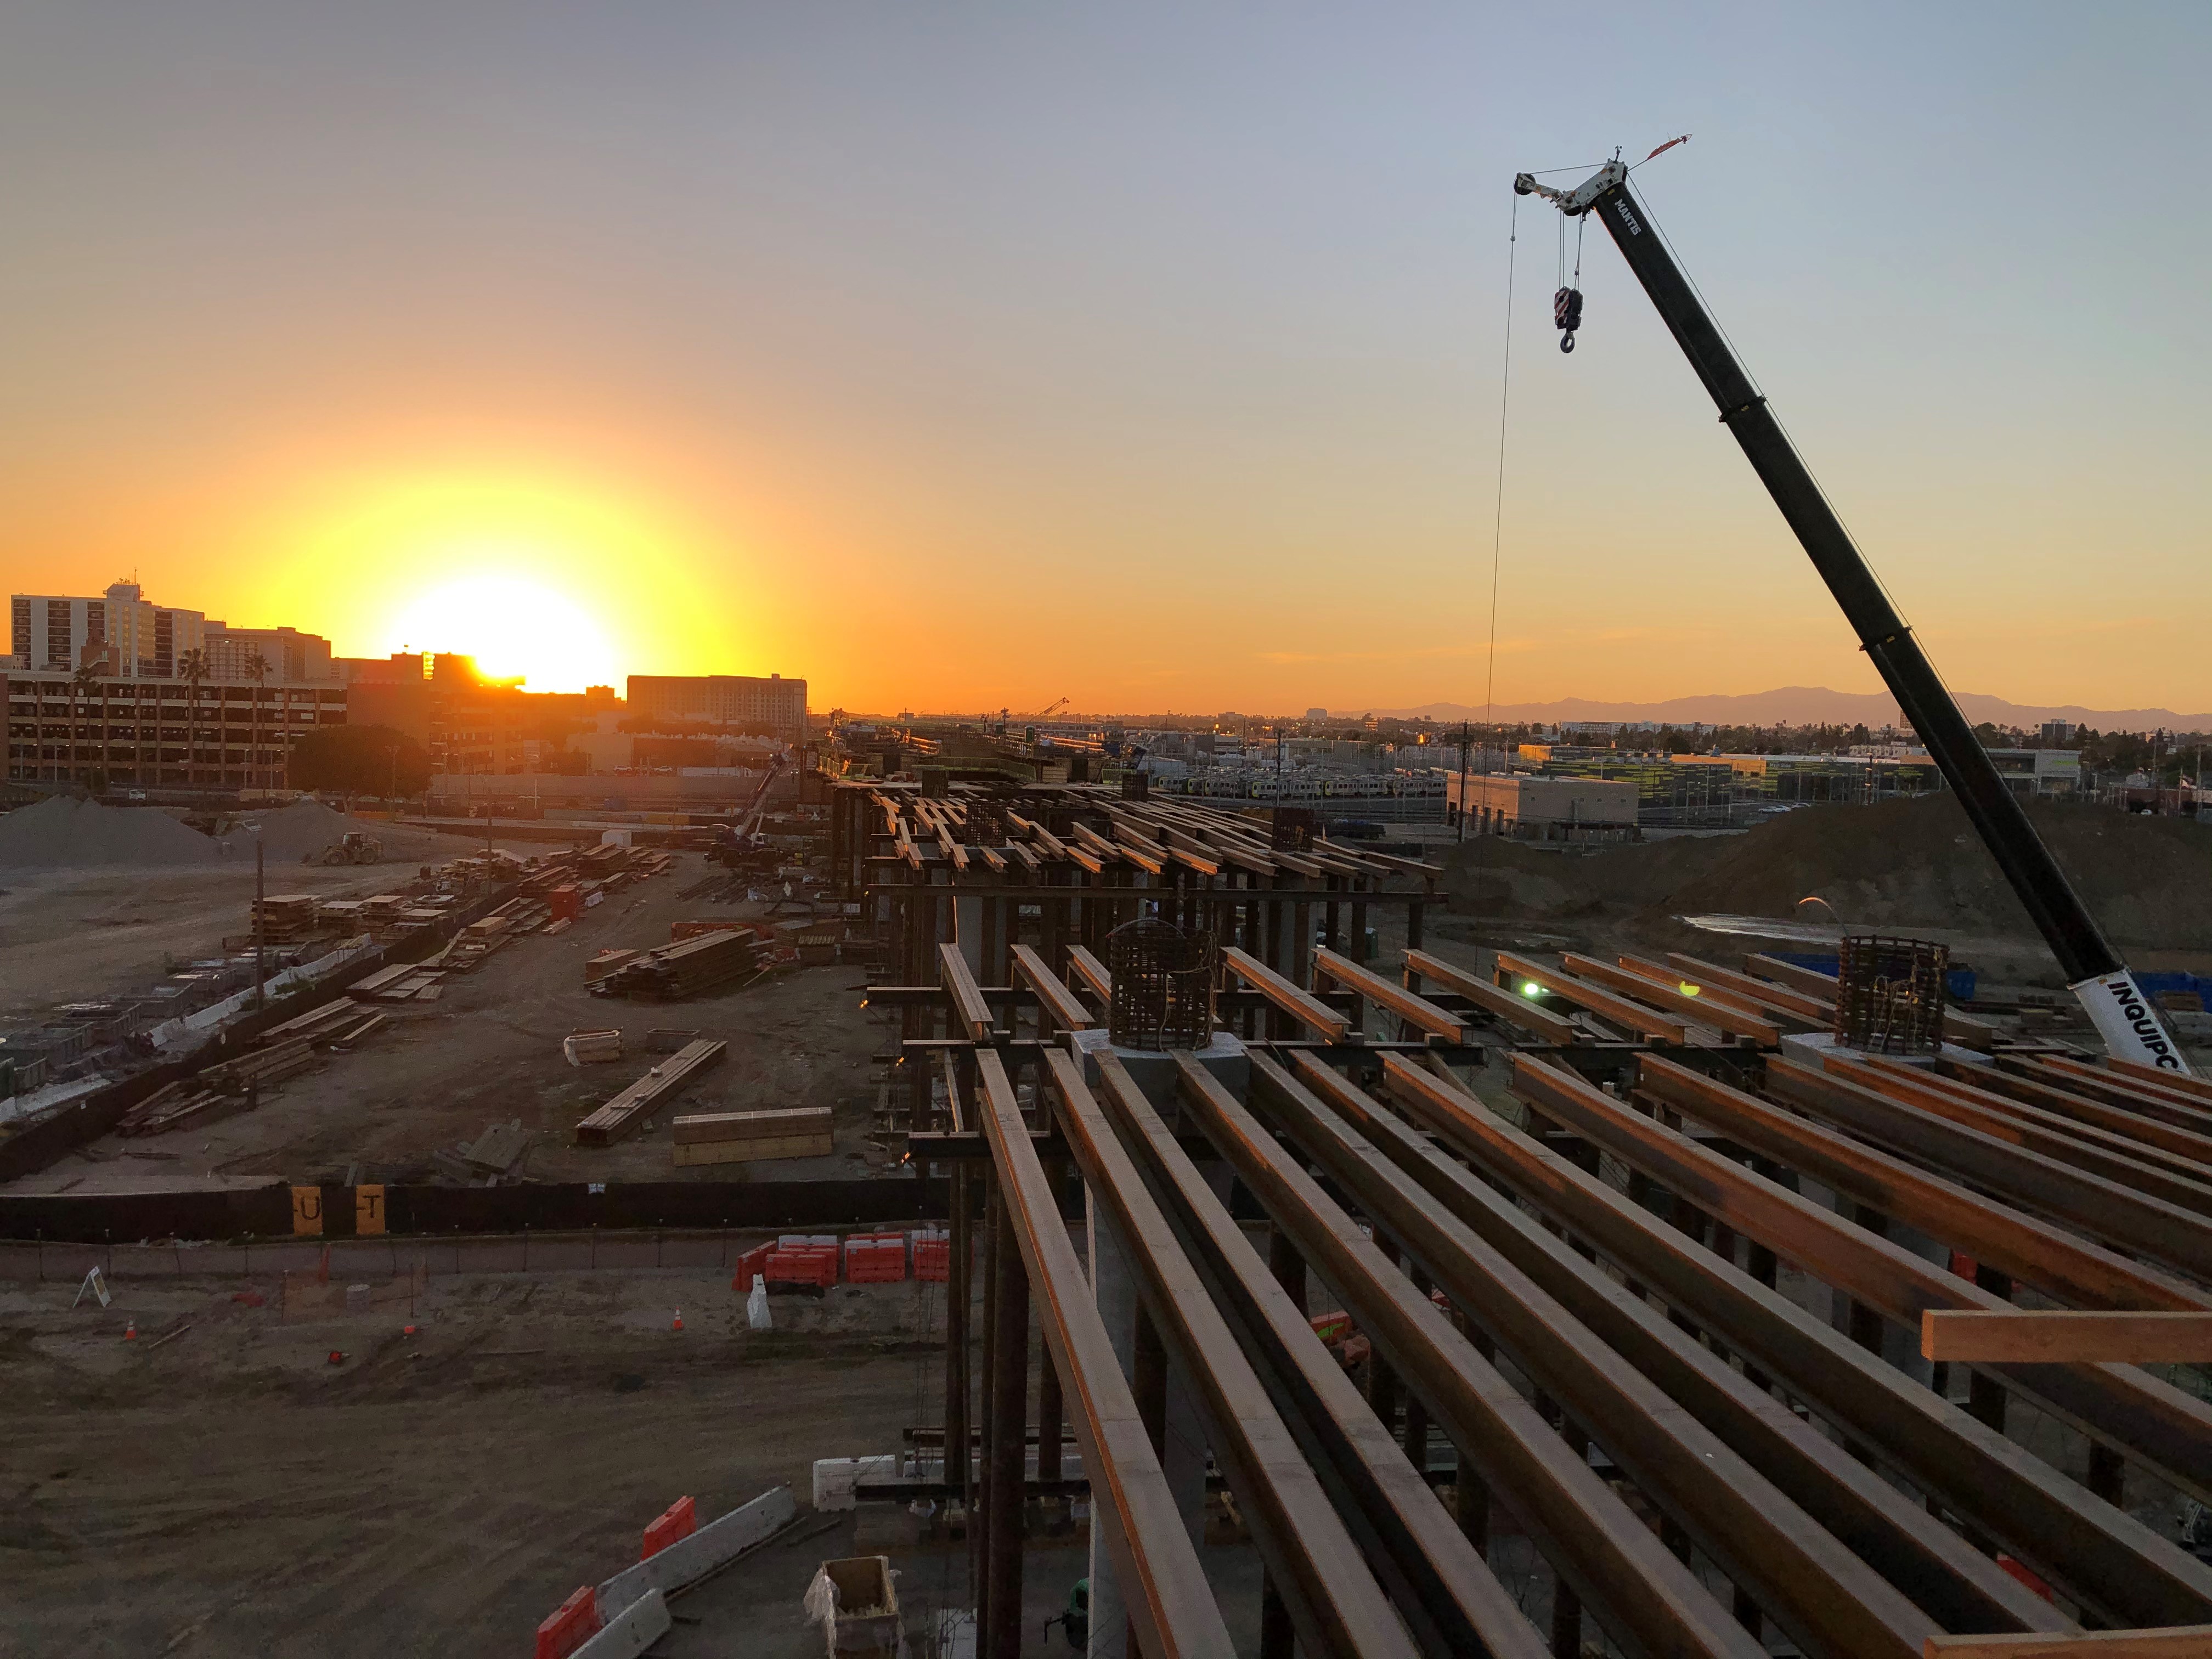 Sunset views from the roof of the Consolidated Rent-A-Car facility as the Automated People Mover train guideway falsework is constructed to connect the two.